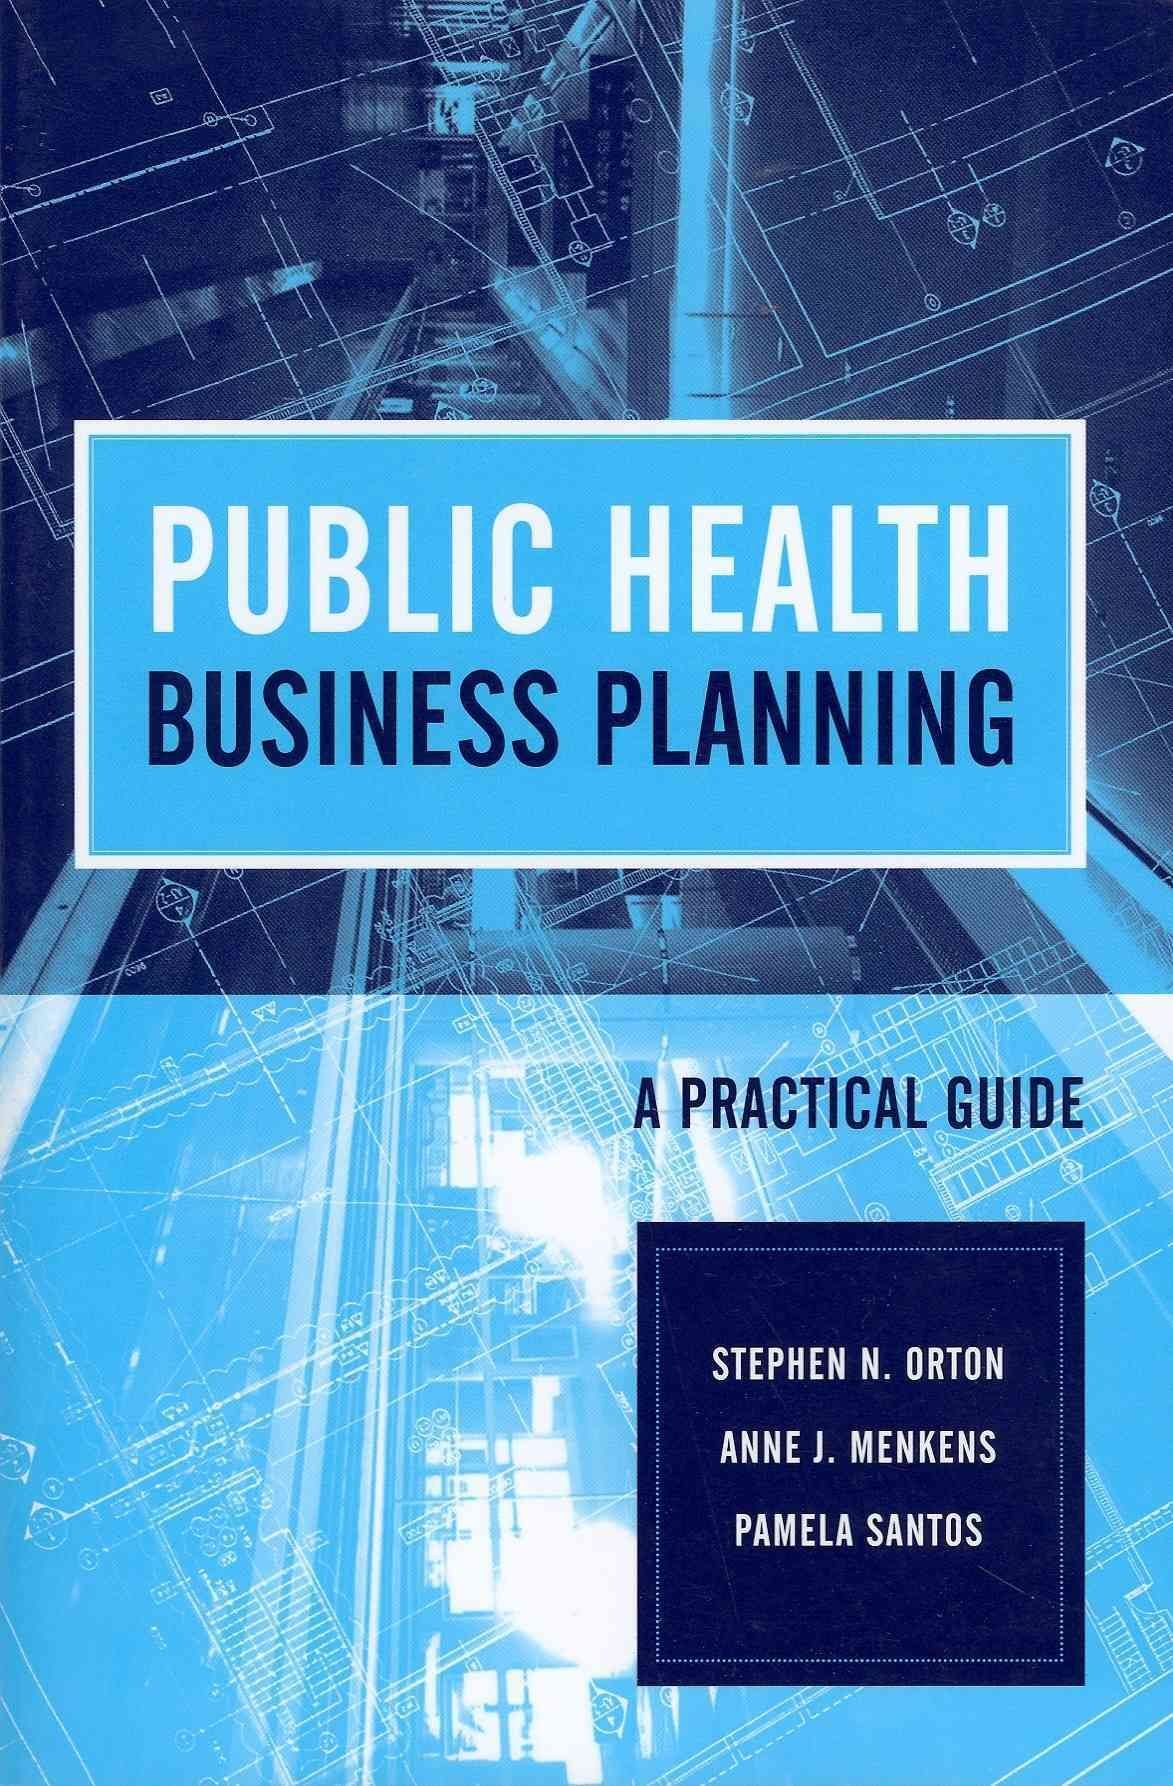 Public Health Business Planning: A Practical Guide